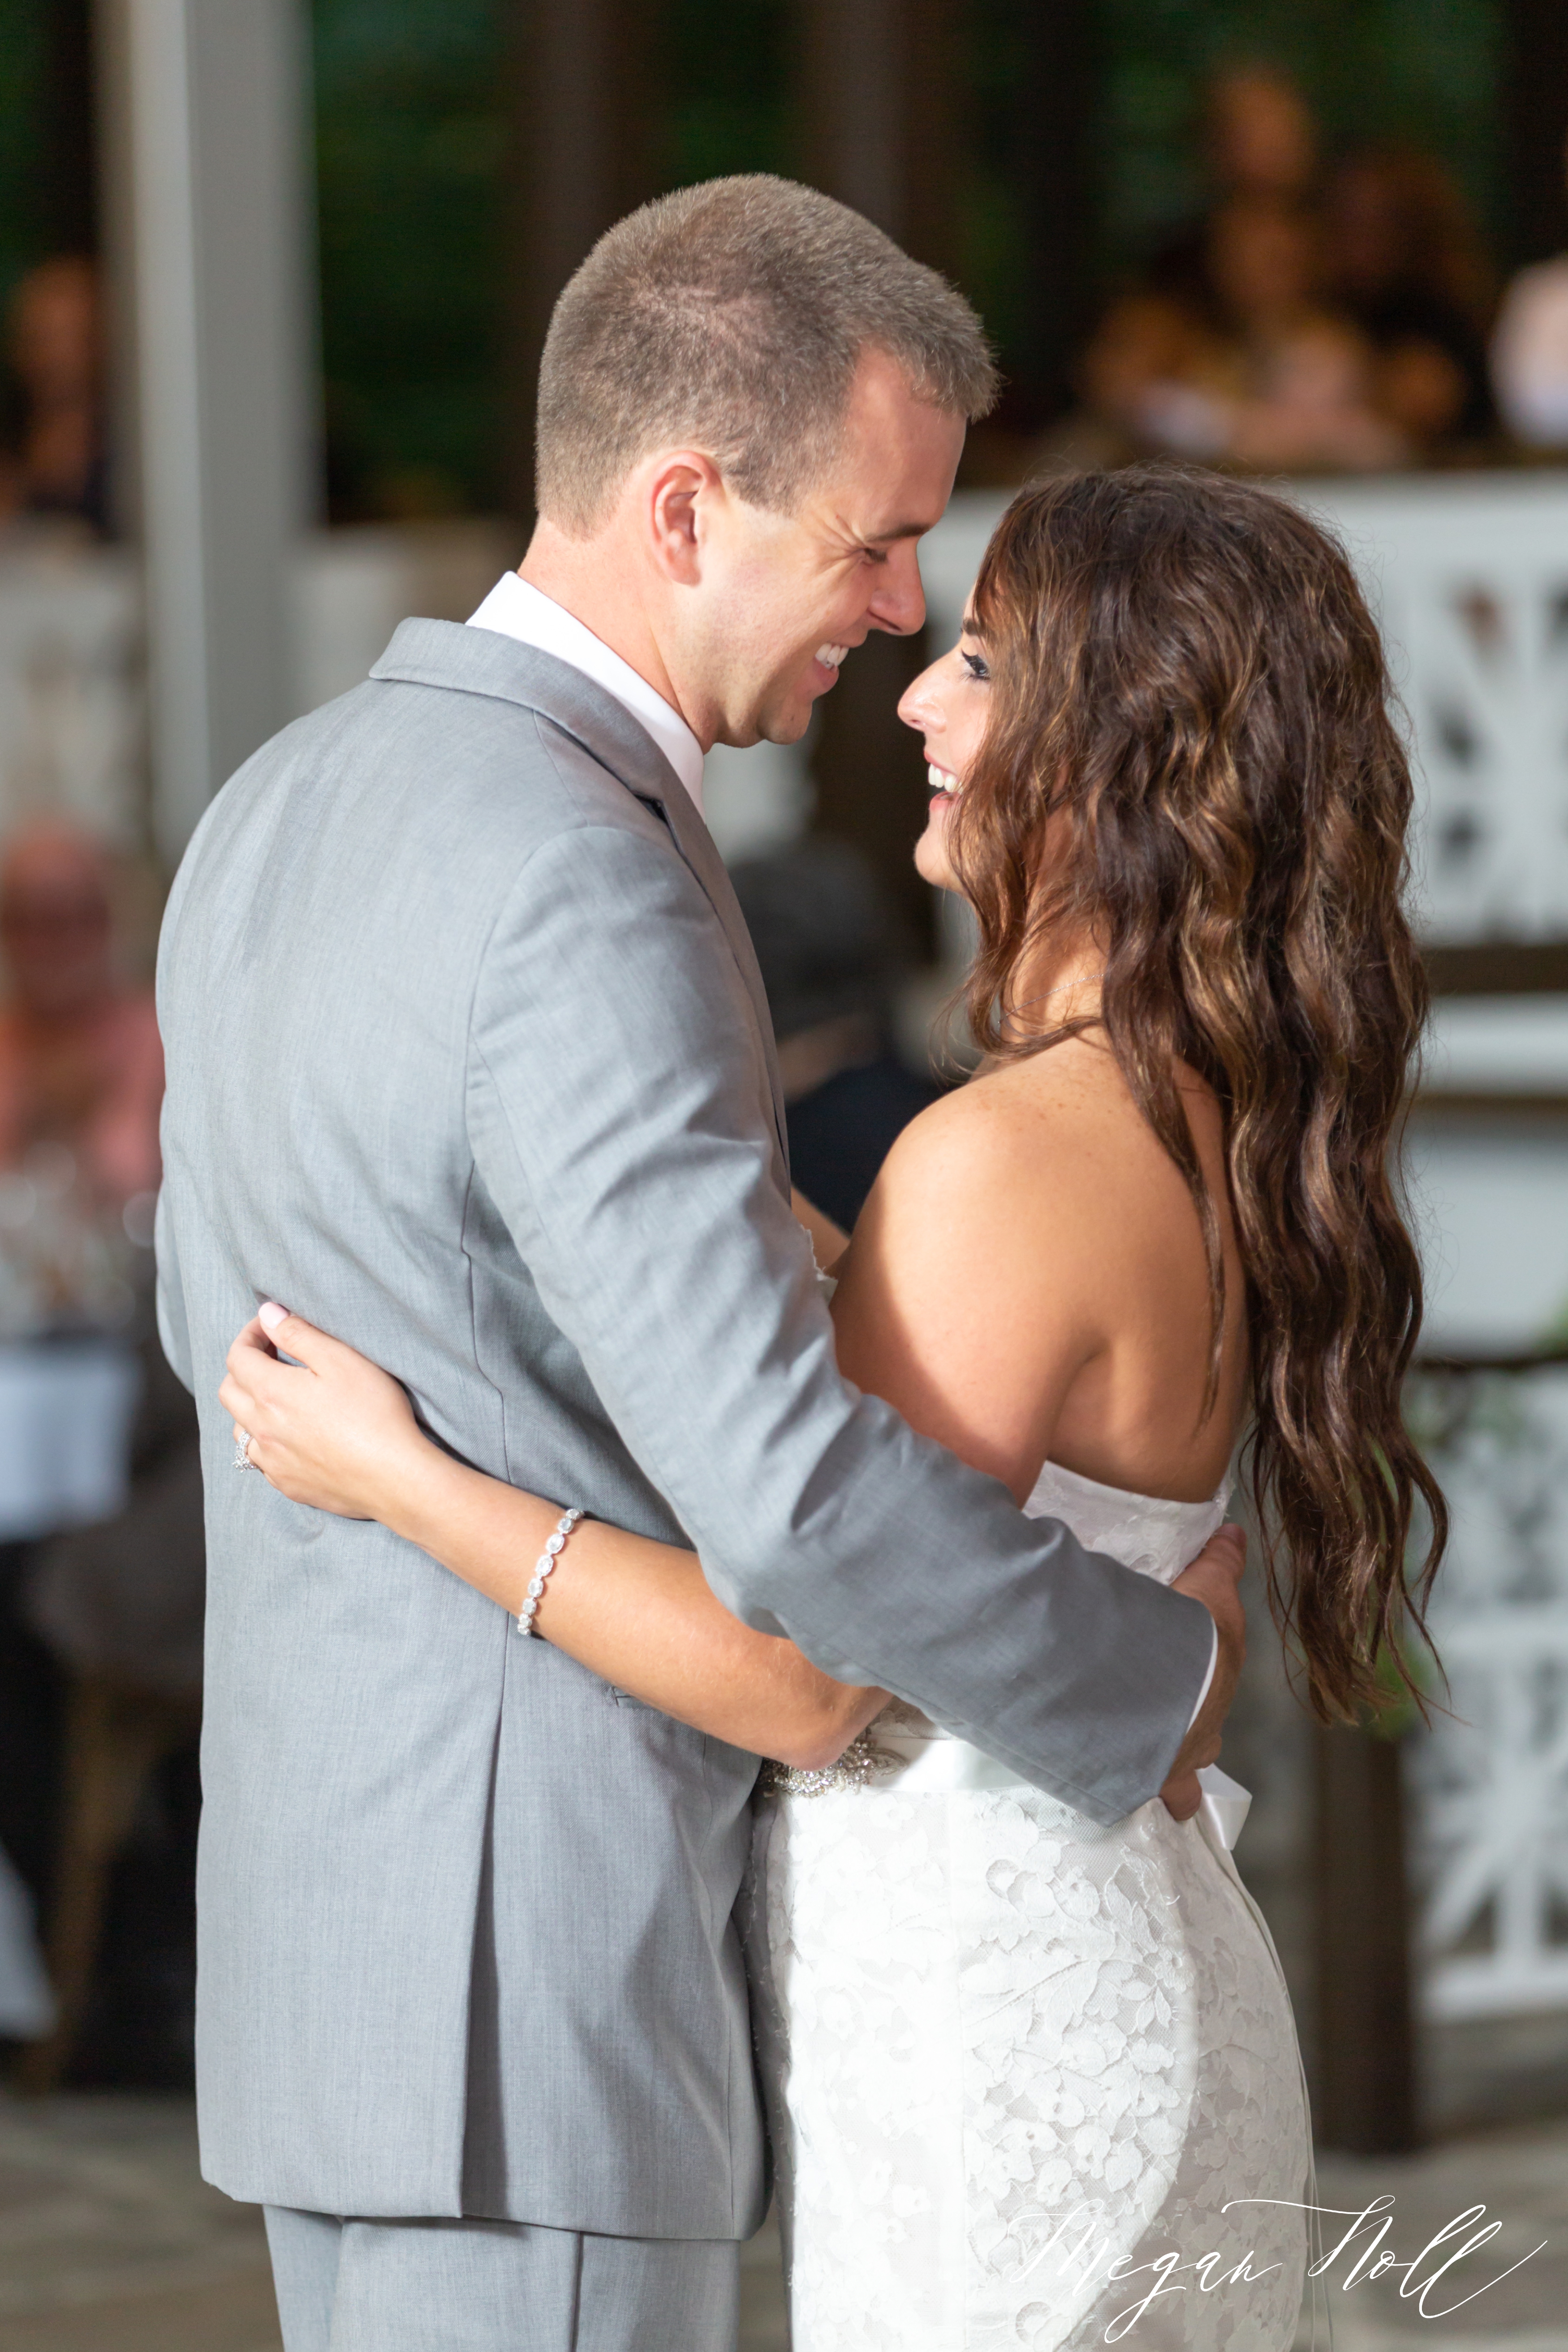 First dance at Krippendorf Lodge